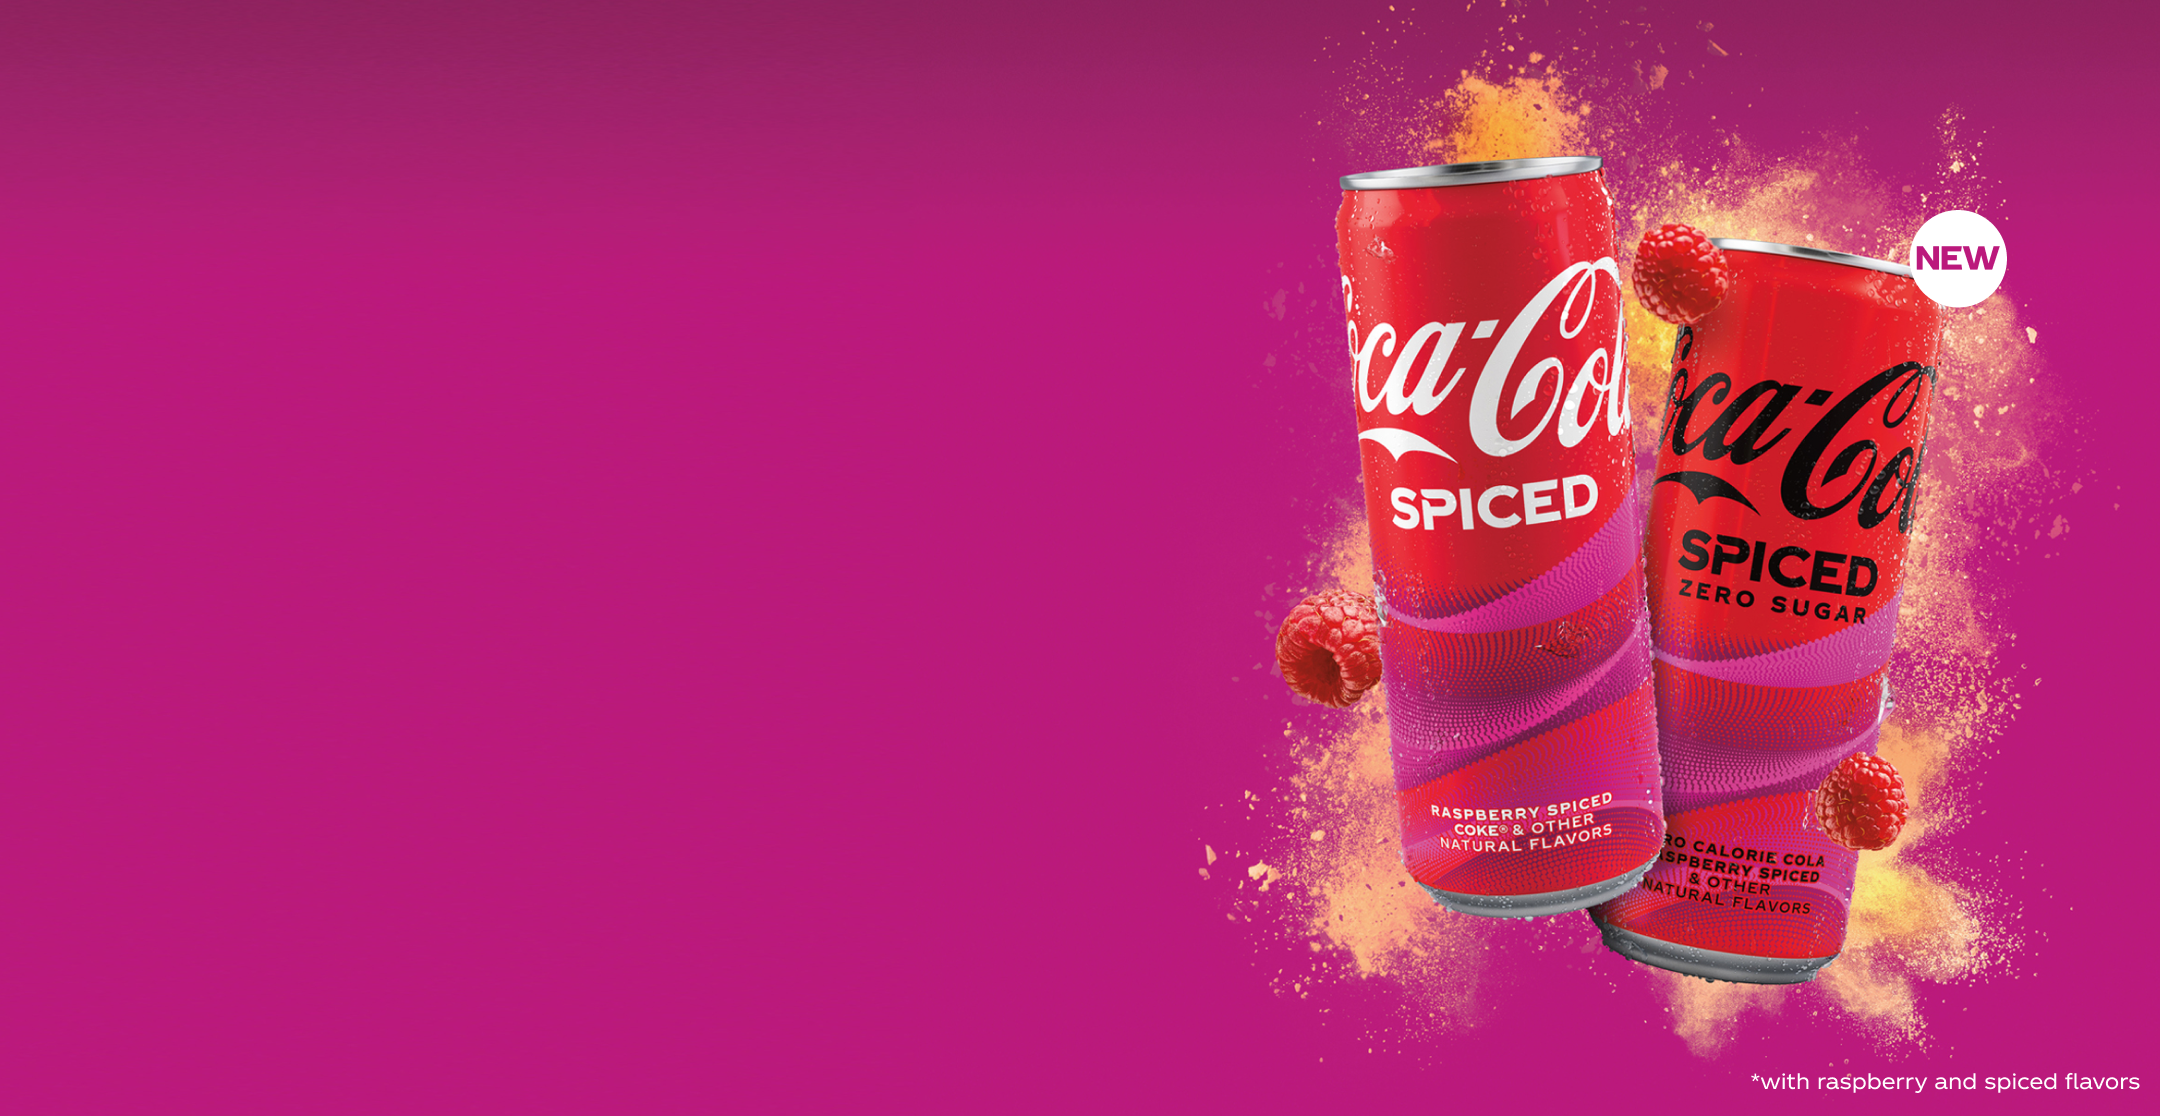 coke spiced cans